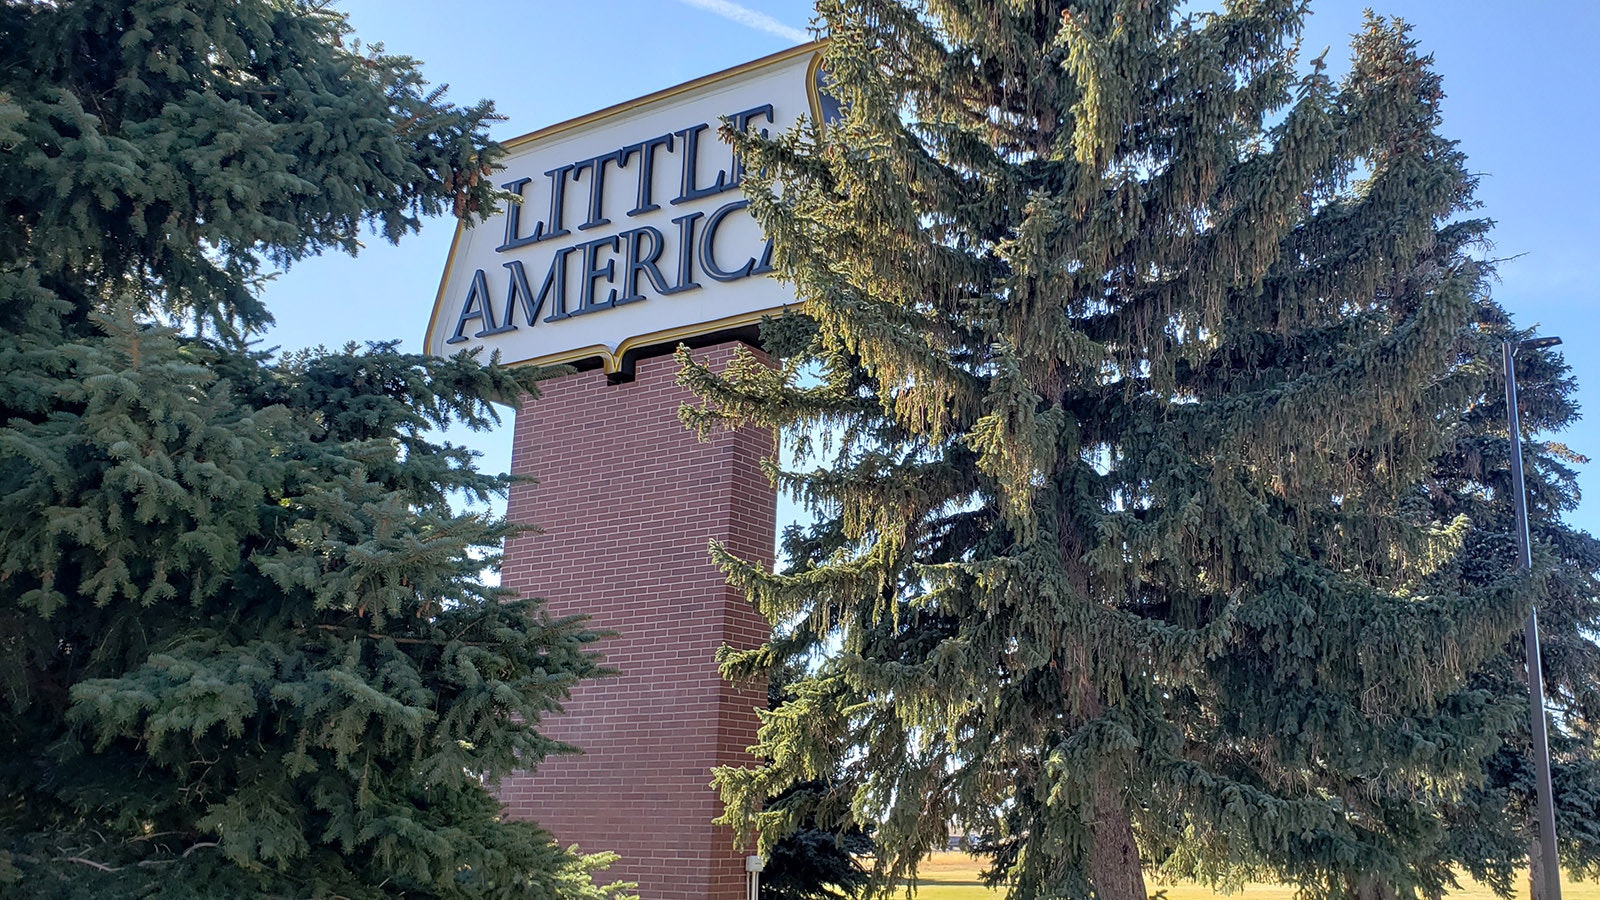 Despite being surrounded by large, mature trees, Little Americas sign is readily visible from the highway.